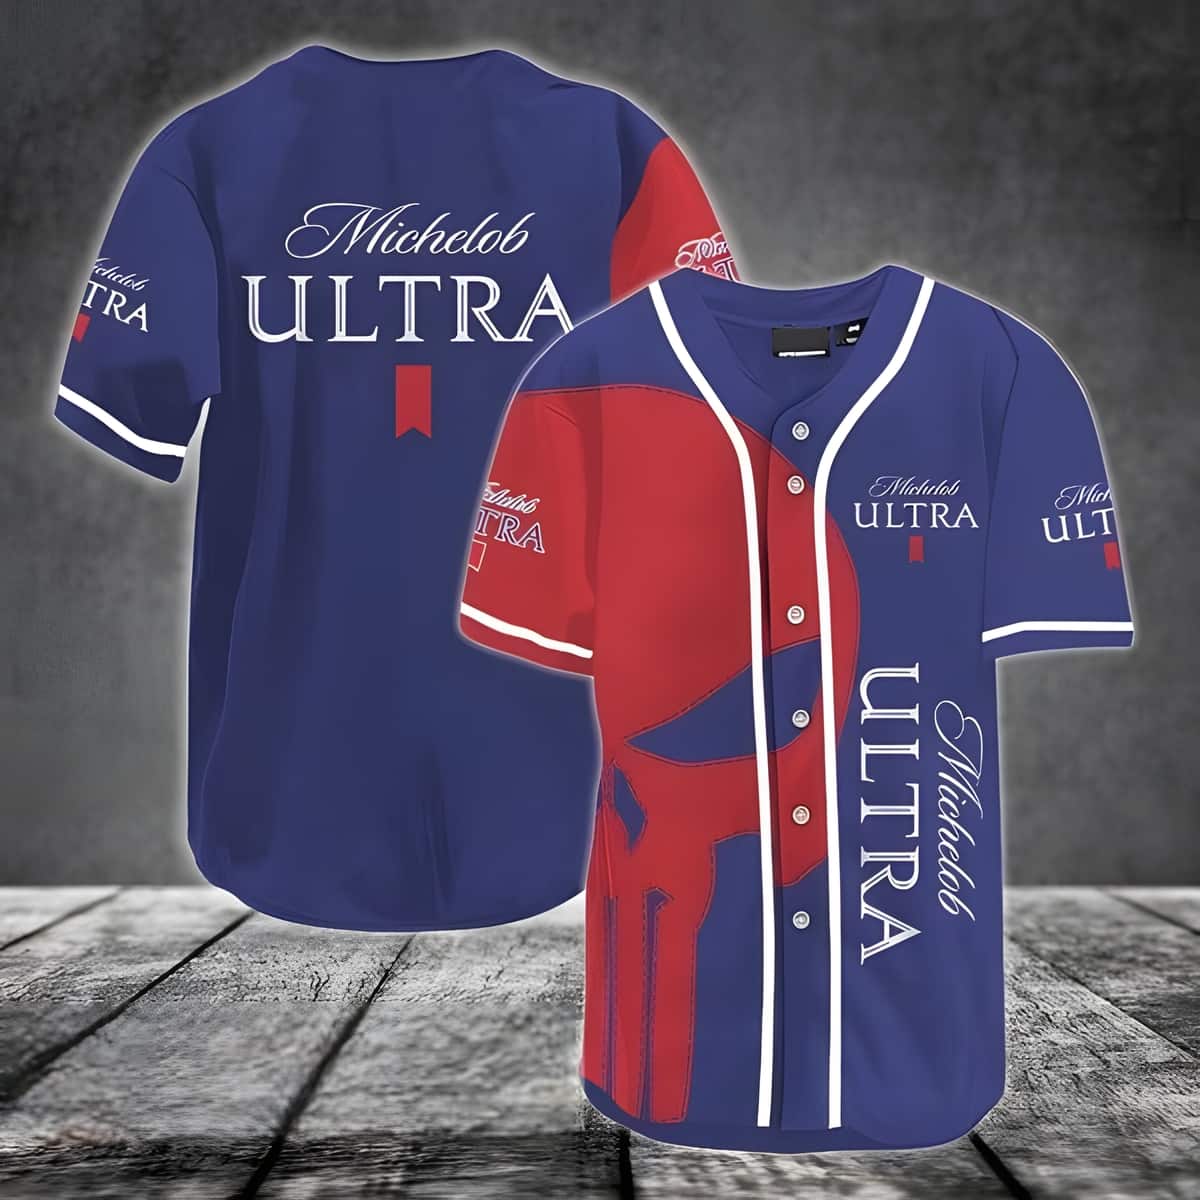 Navi Michelob ULTRA Baseball Jersey Beer Gift For Brothers